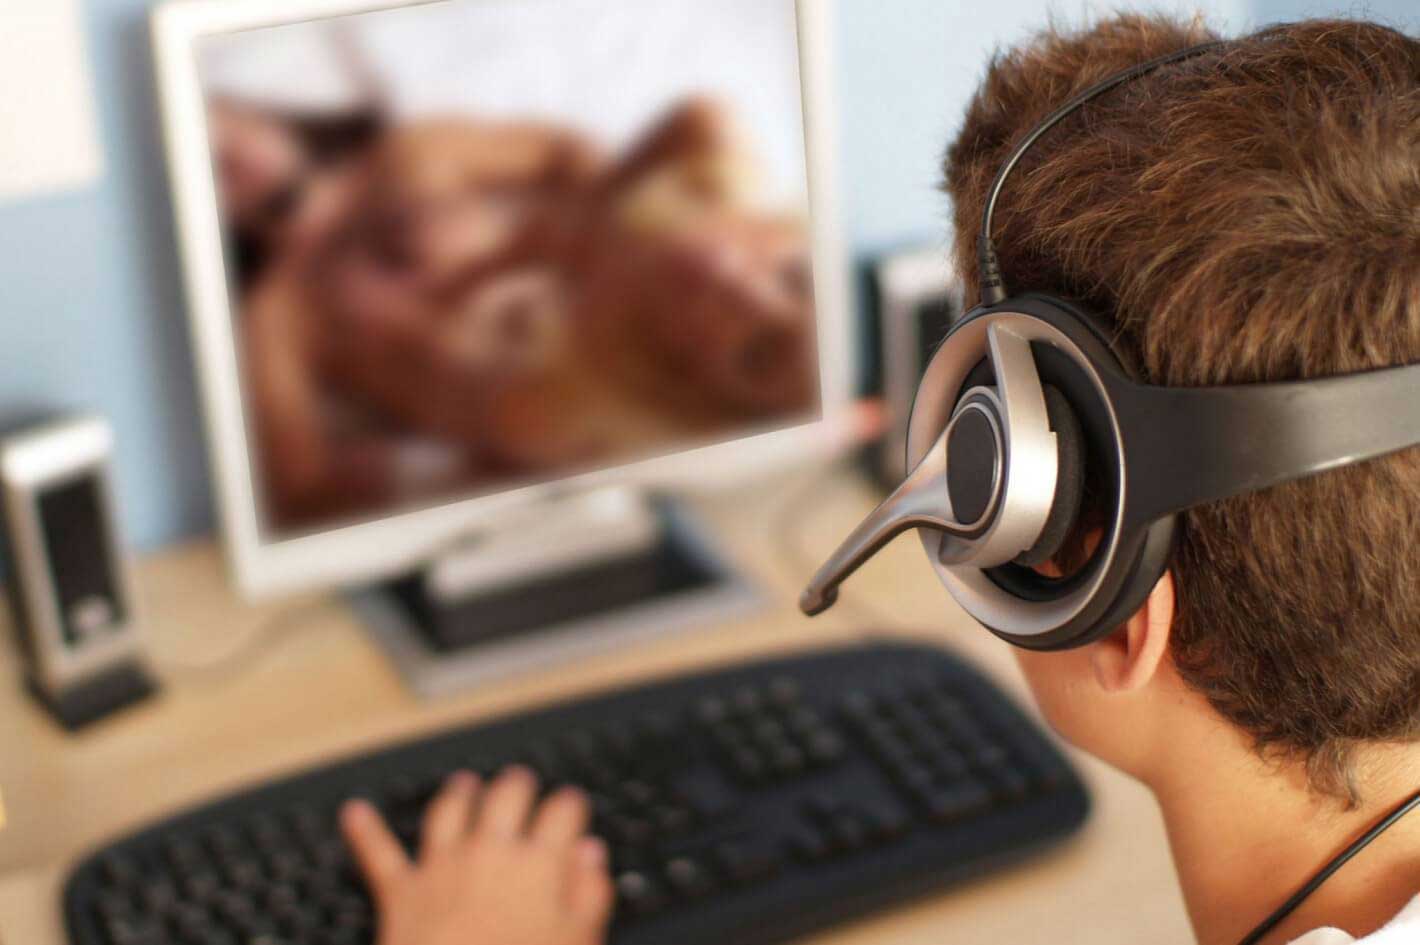 Viewing pornography increase unethical behavior at work